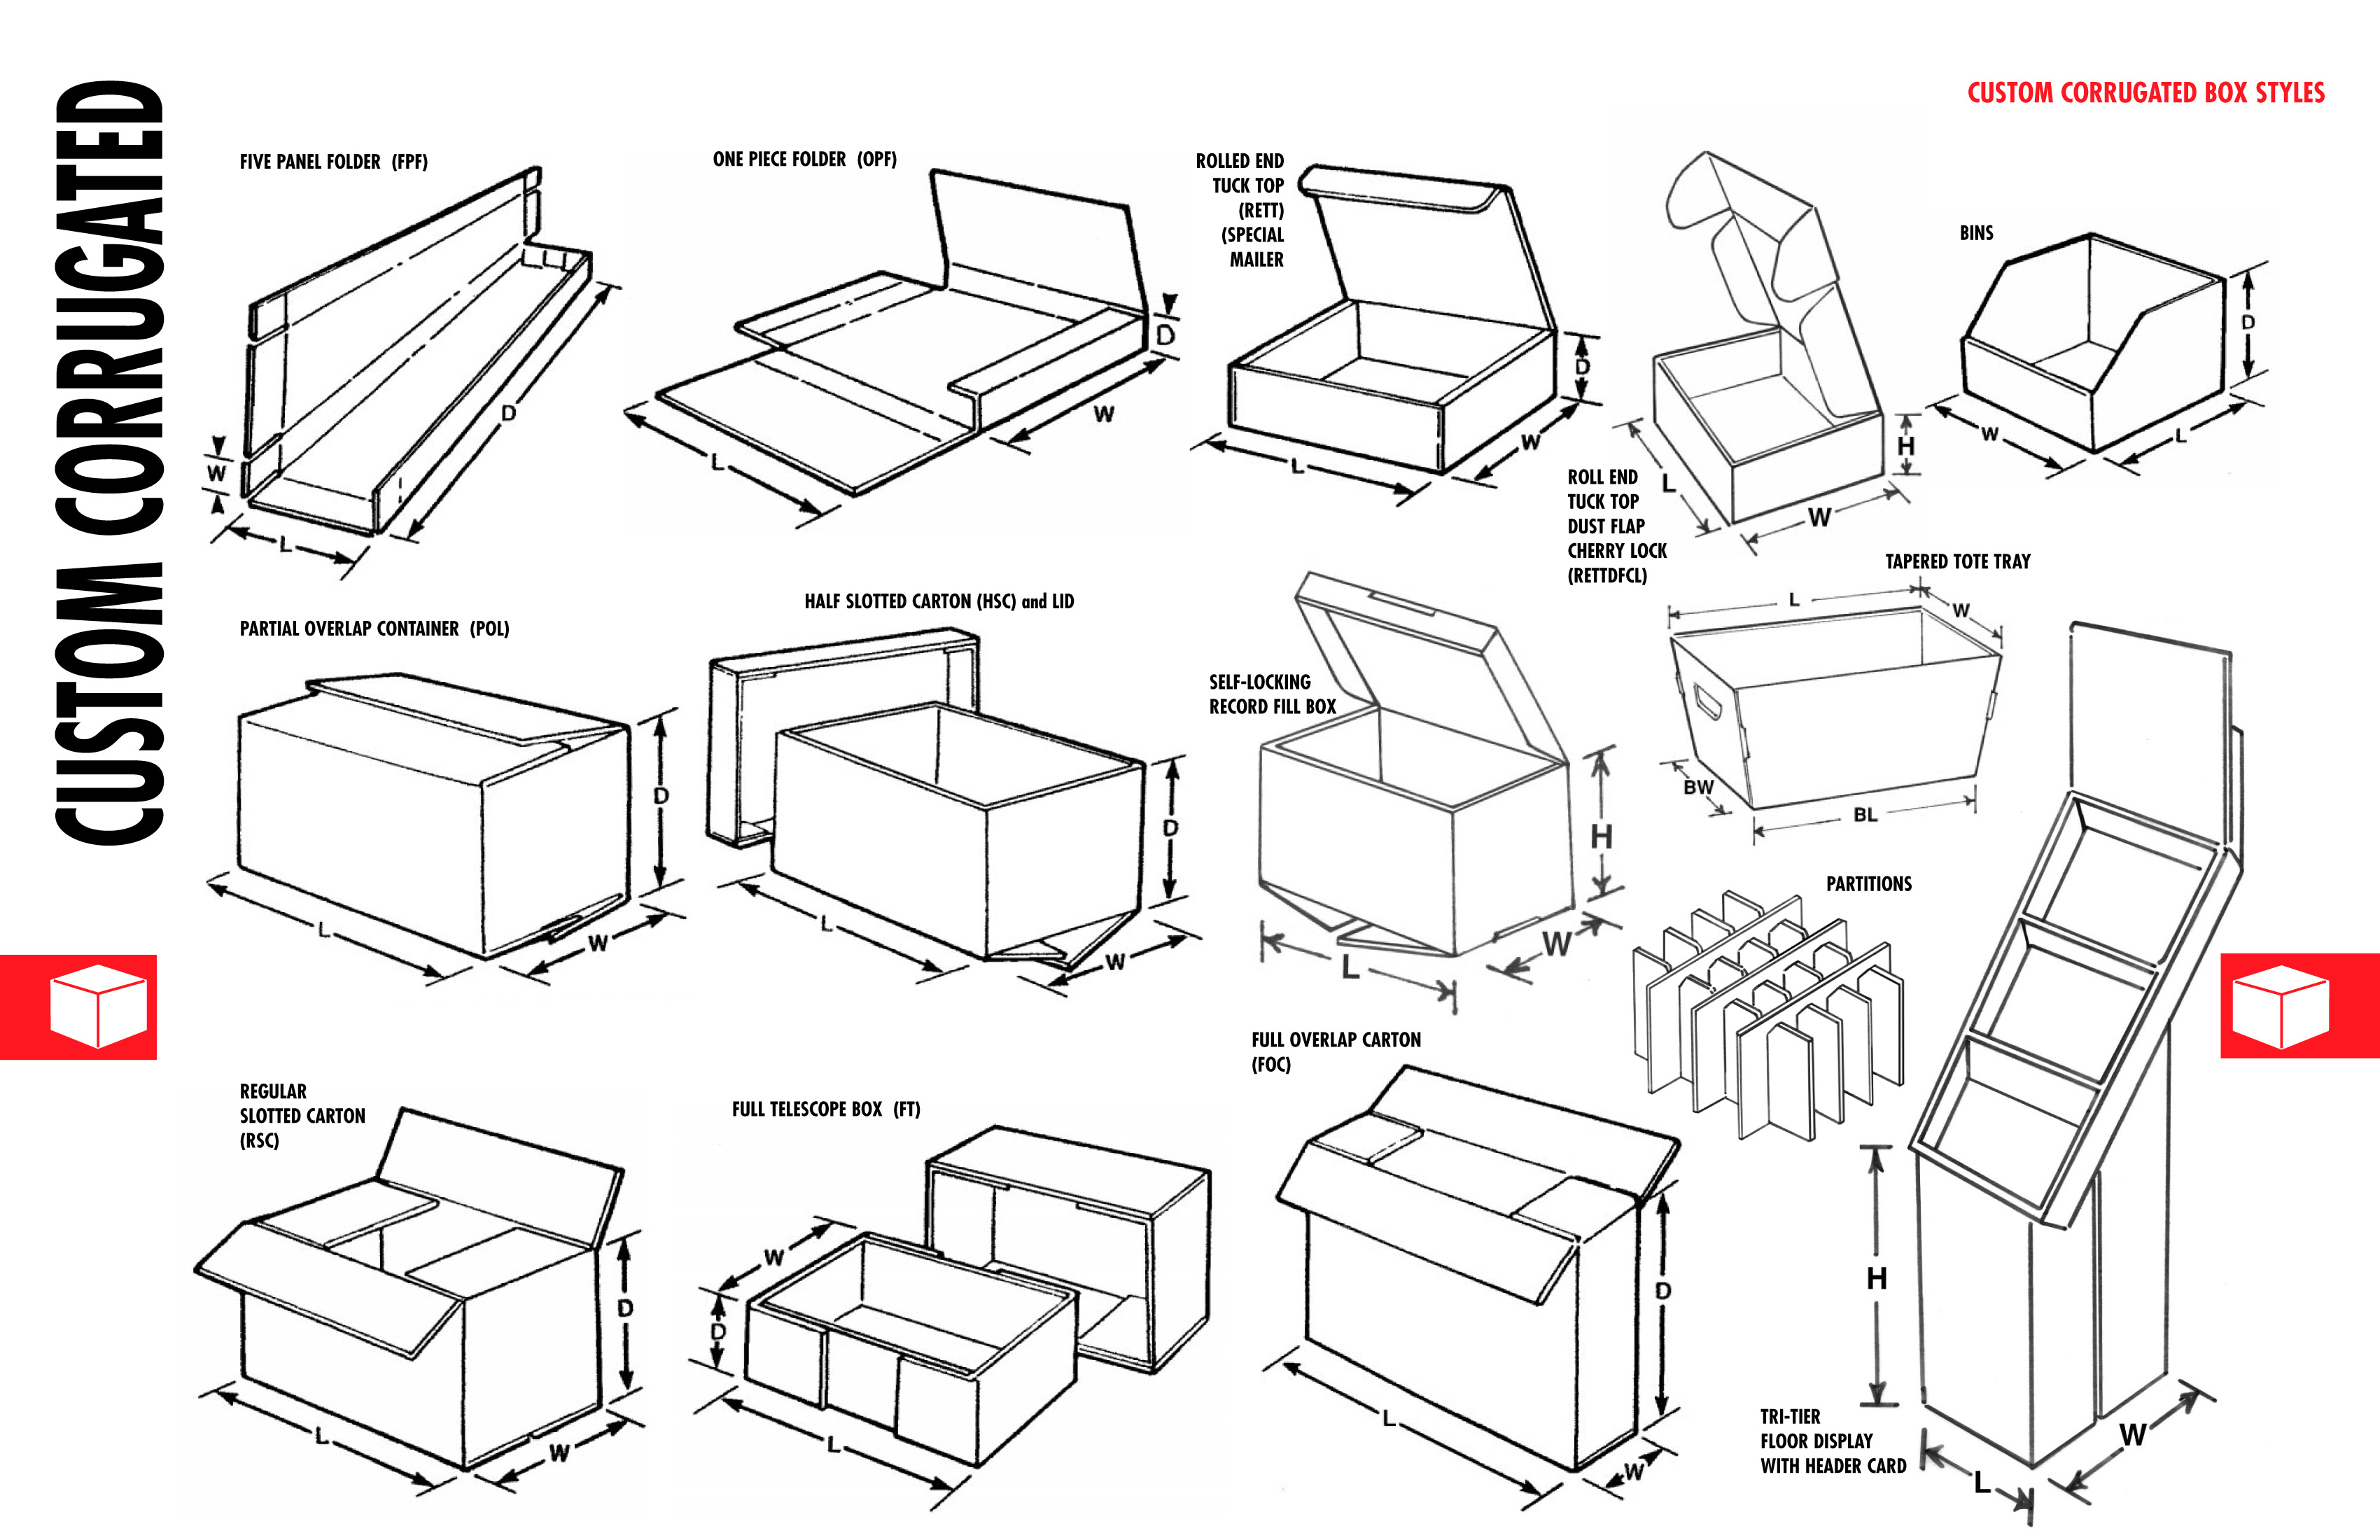 Corrugated Box Specifications Cheat Sheet